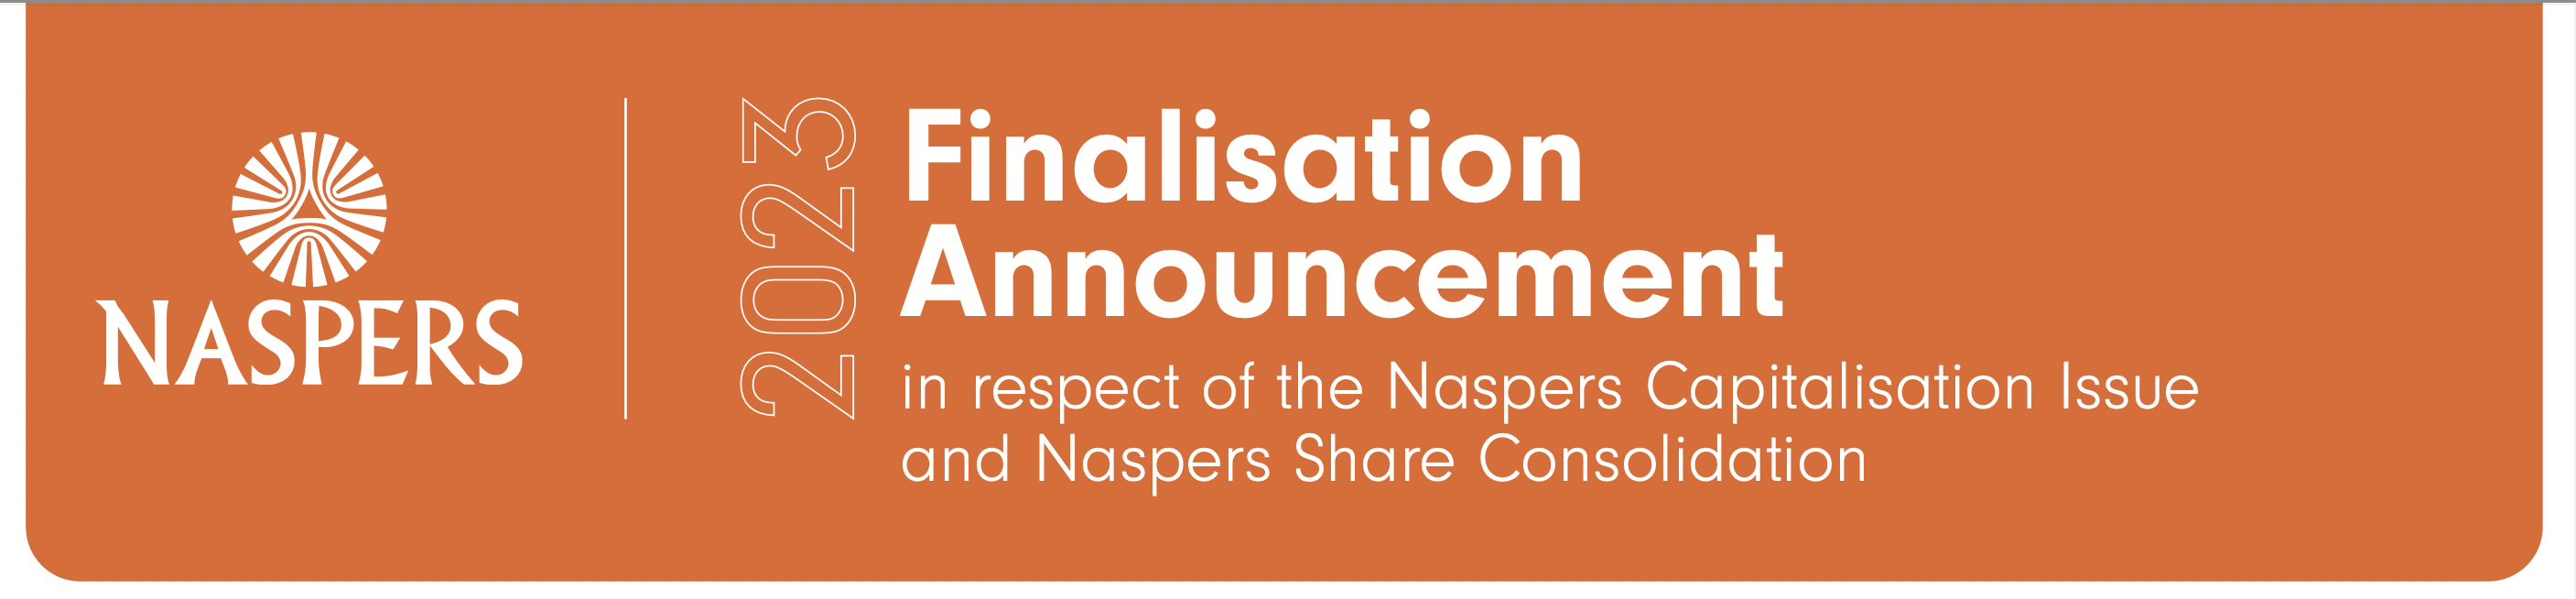 Finalisation Announcement in respect of the Naspers Capitilisation Issue and Naspers Share Consolidation